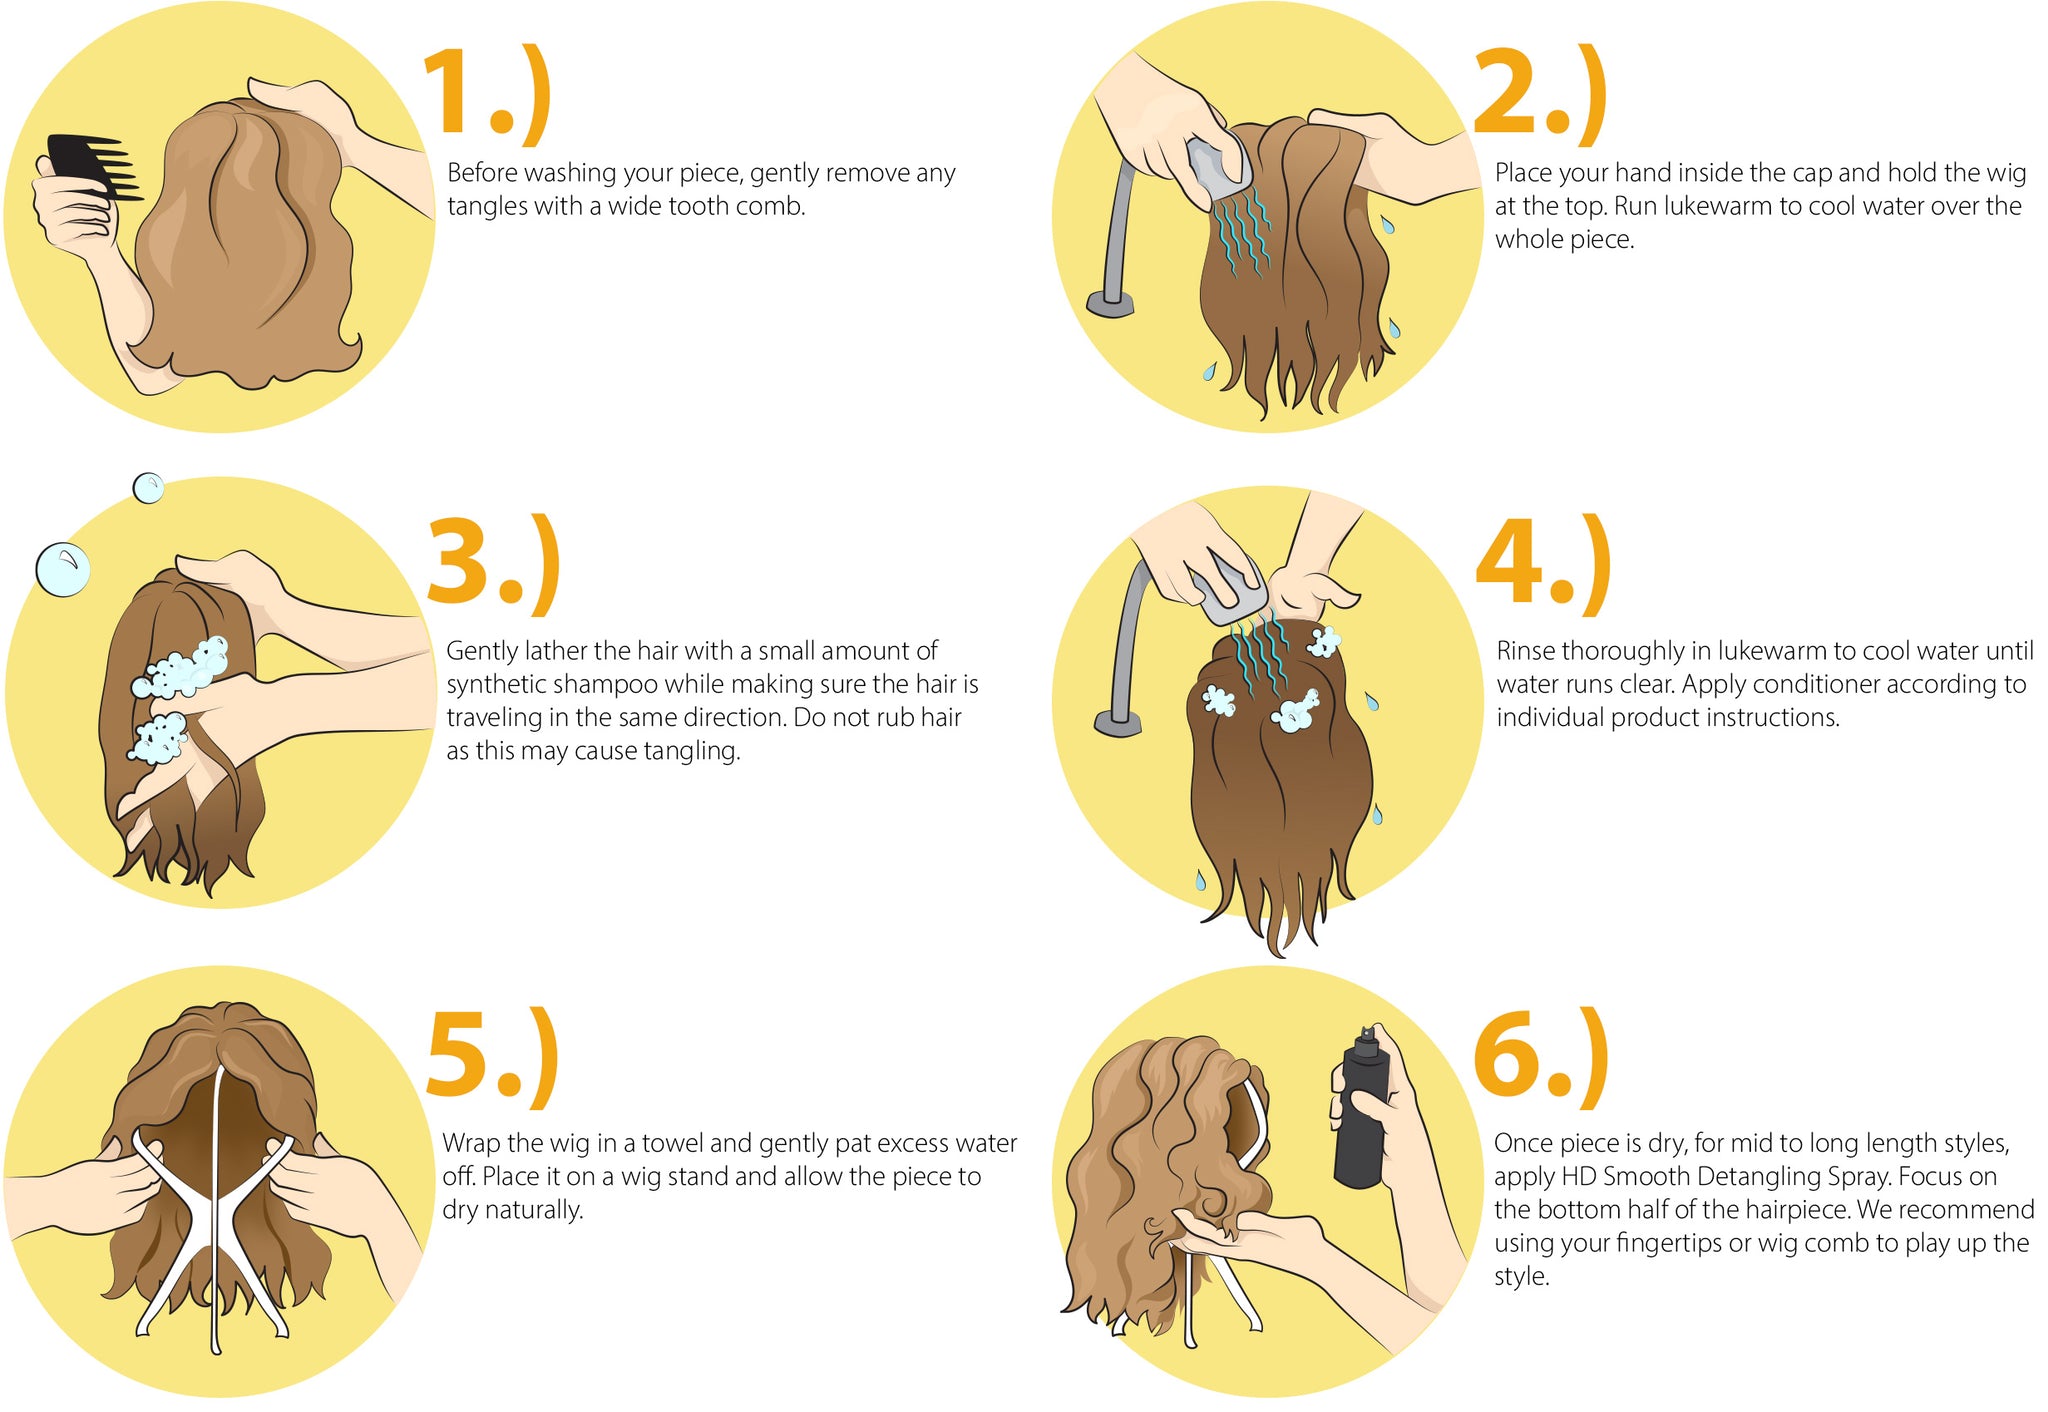 6 steps on how to wash your hair.